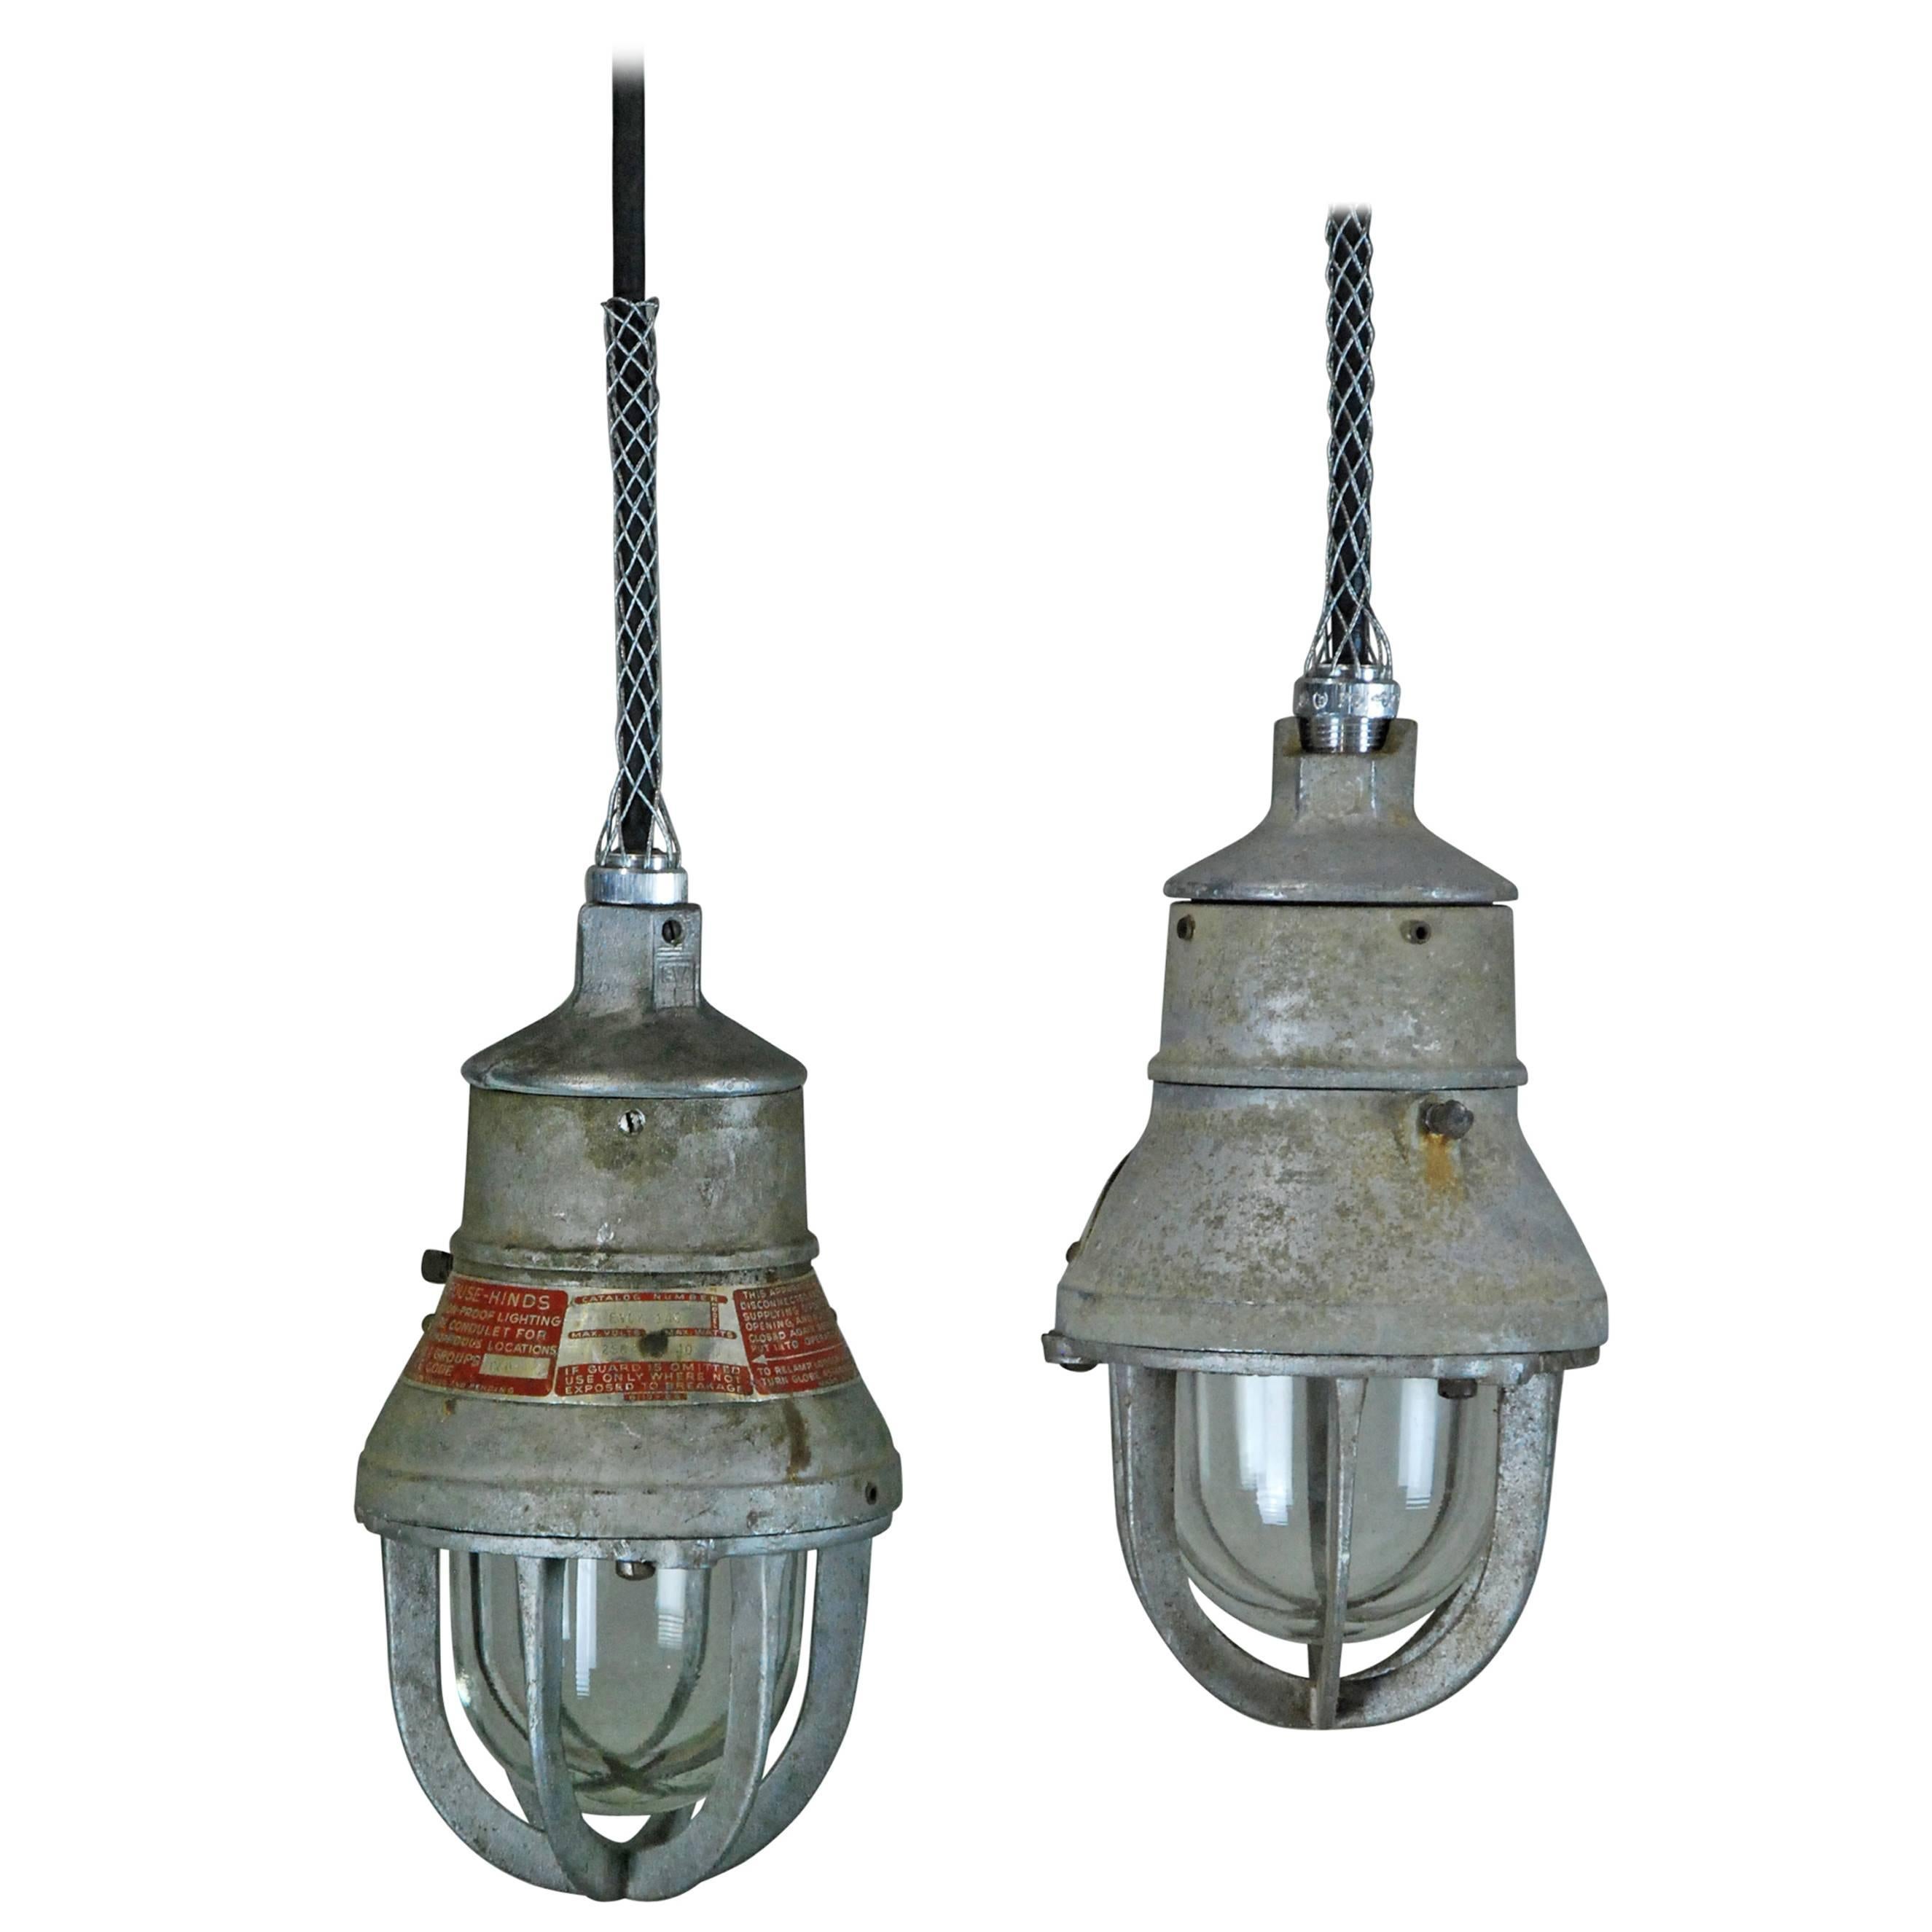 1930 Rare Small Industrial Crouse Hinds Pendant Light